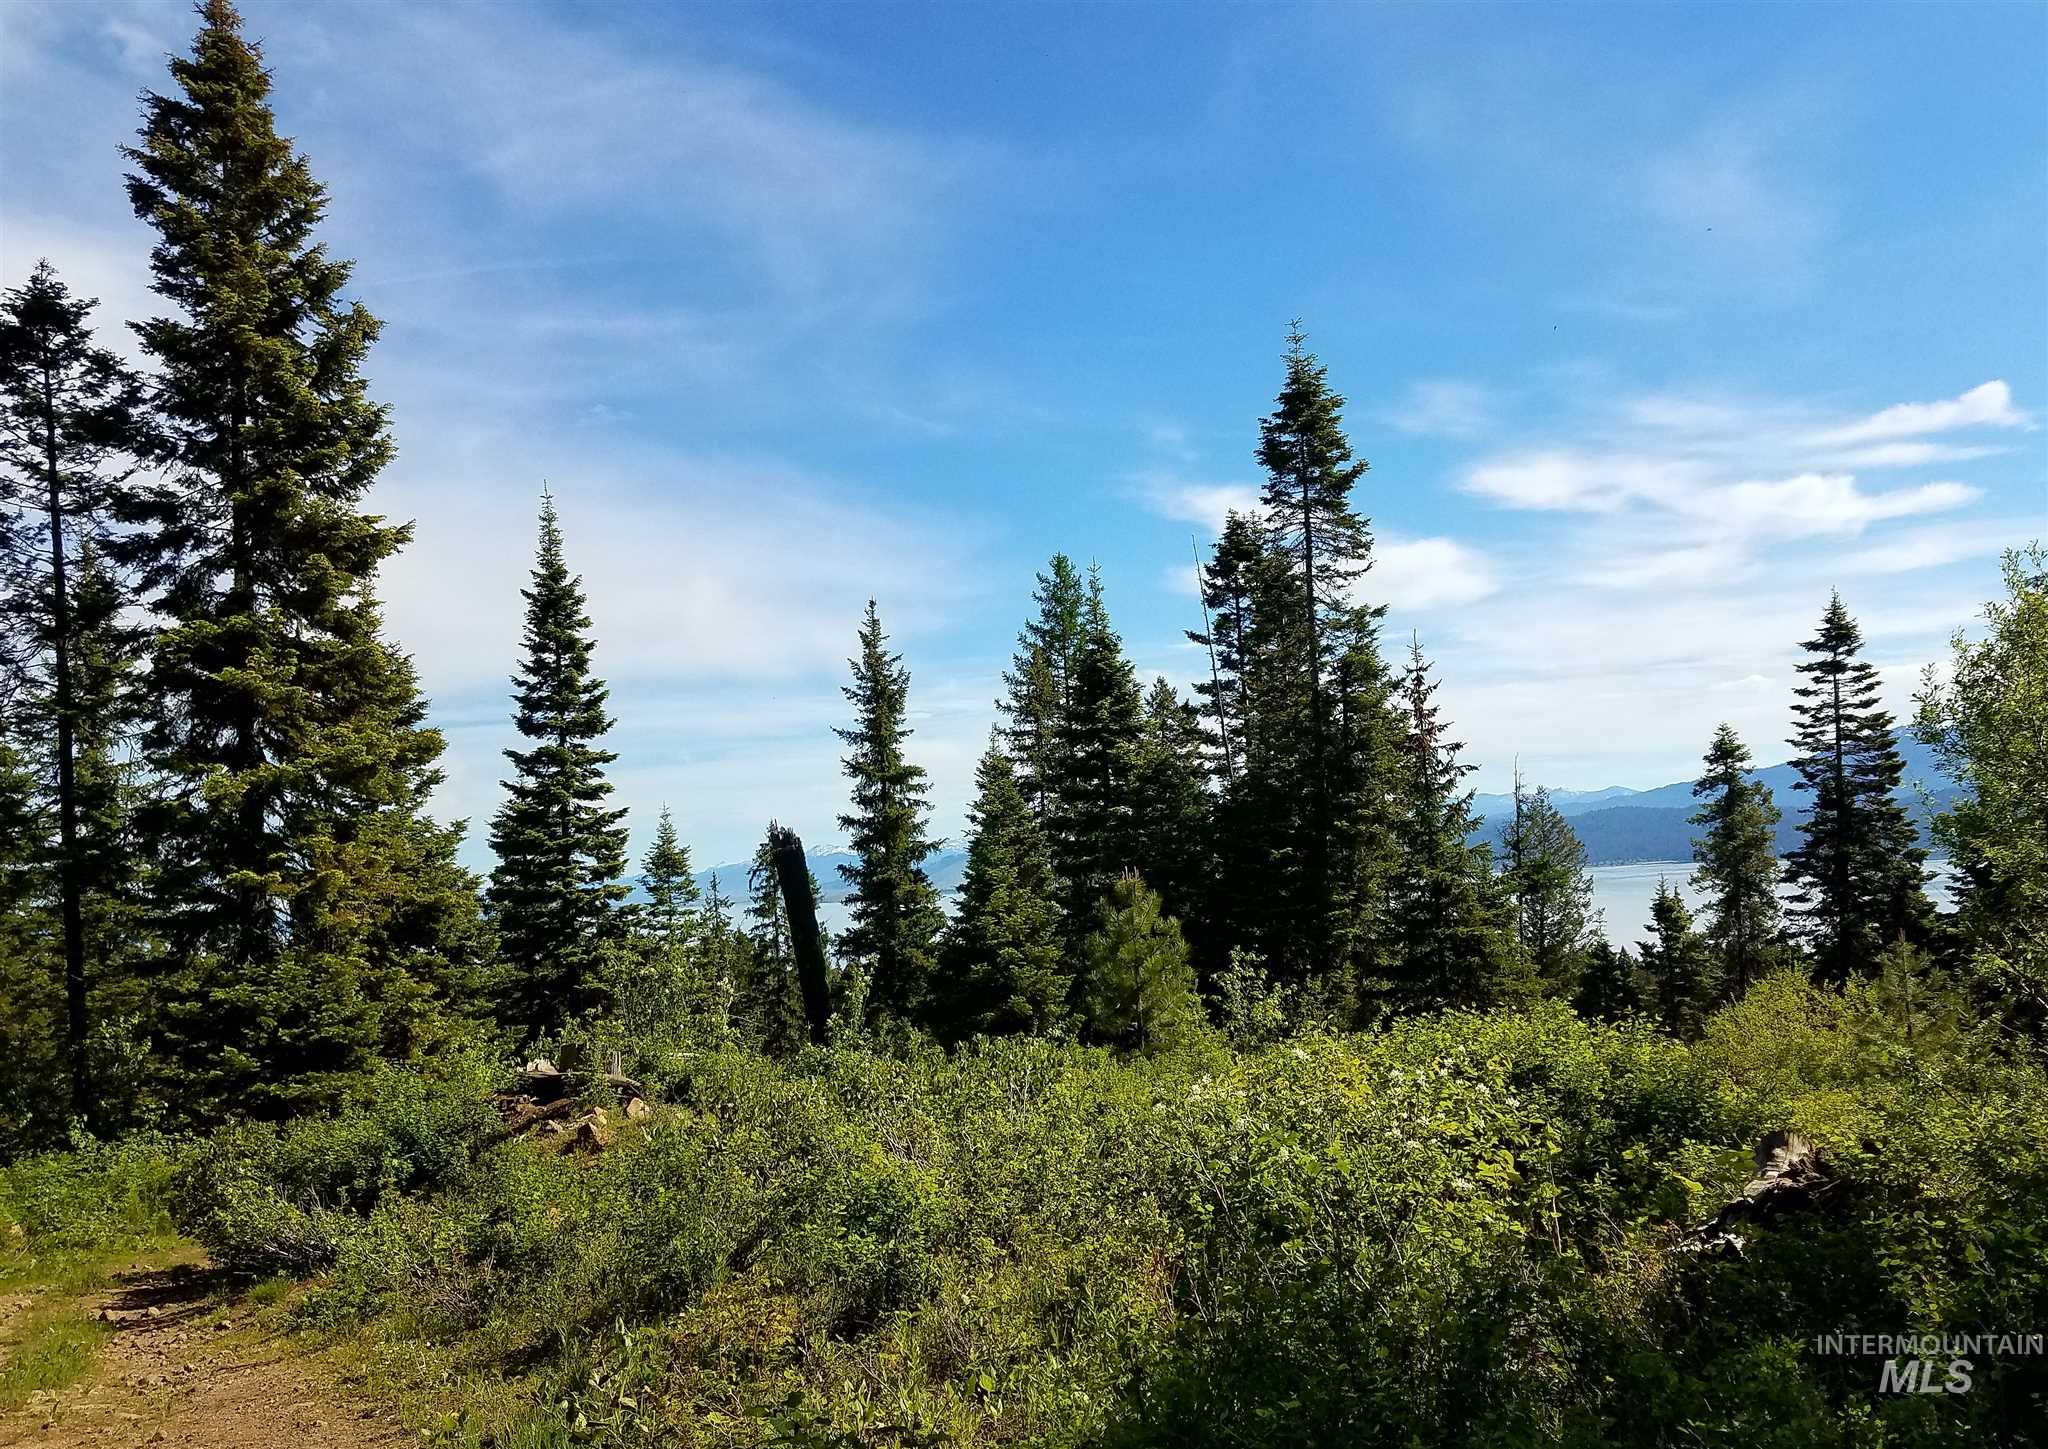 0 Anderson Creek & West Mountain, Cascade, Idaho 83611-0000, Land For Sale, Price $3,750,000,MLS 98795989